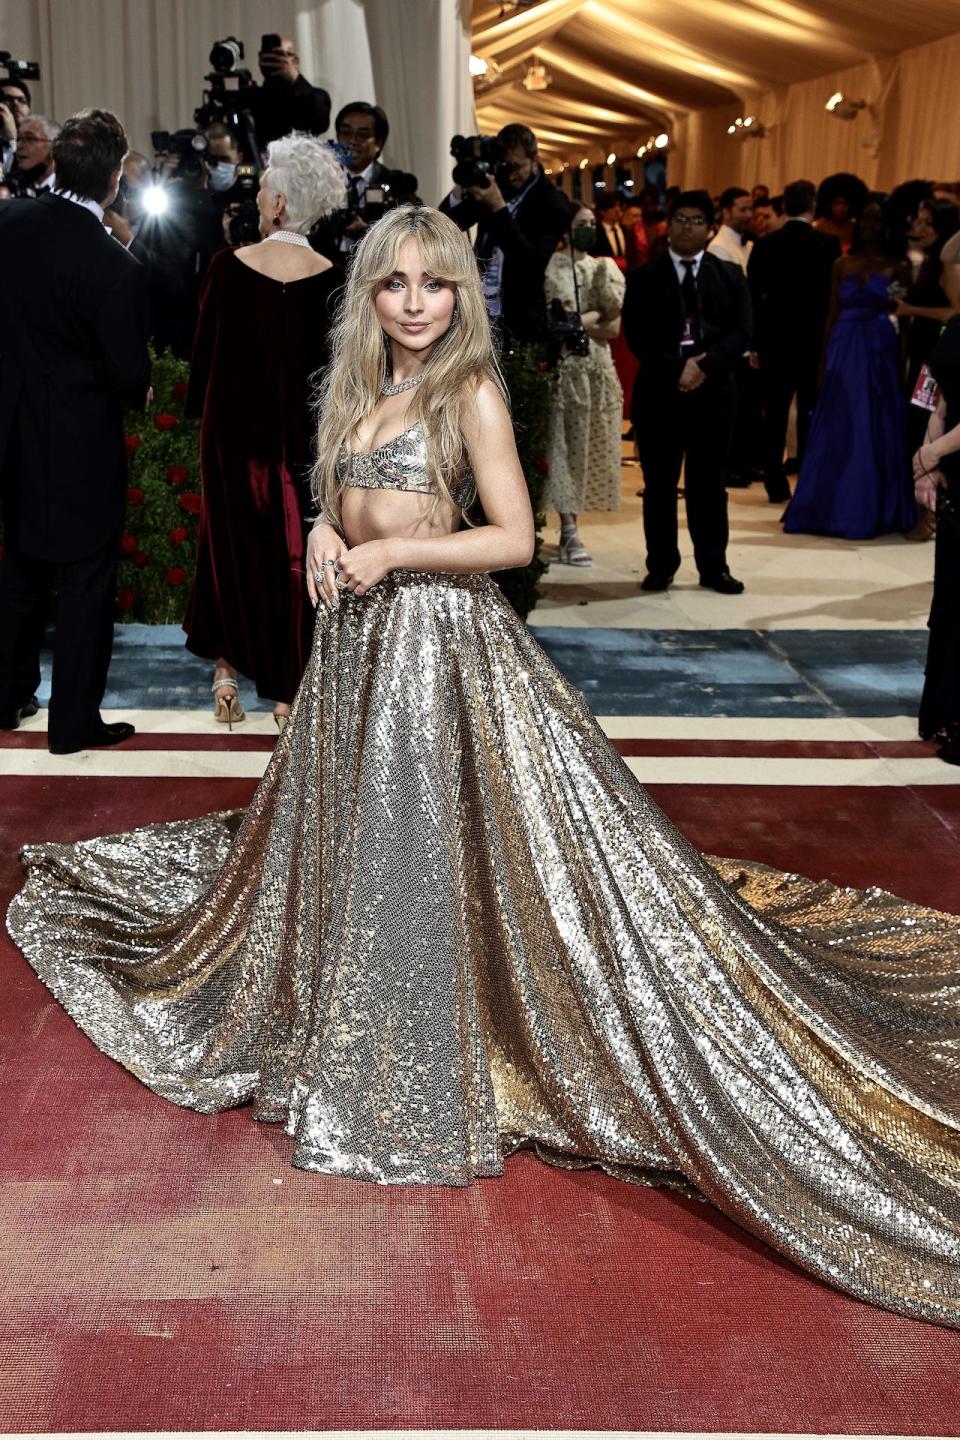 Sabrina Carpenter attends The 2022 Met Gala Celebrating "In America: An Anthology of Fashion" at The Metropolitan Museum of Art on May 2, 2022.